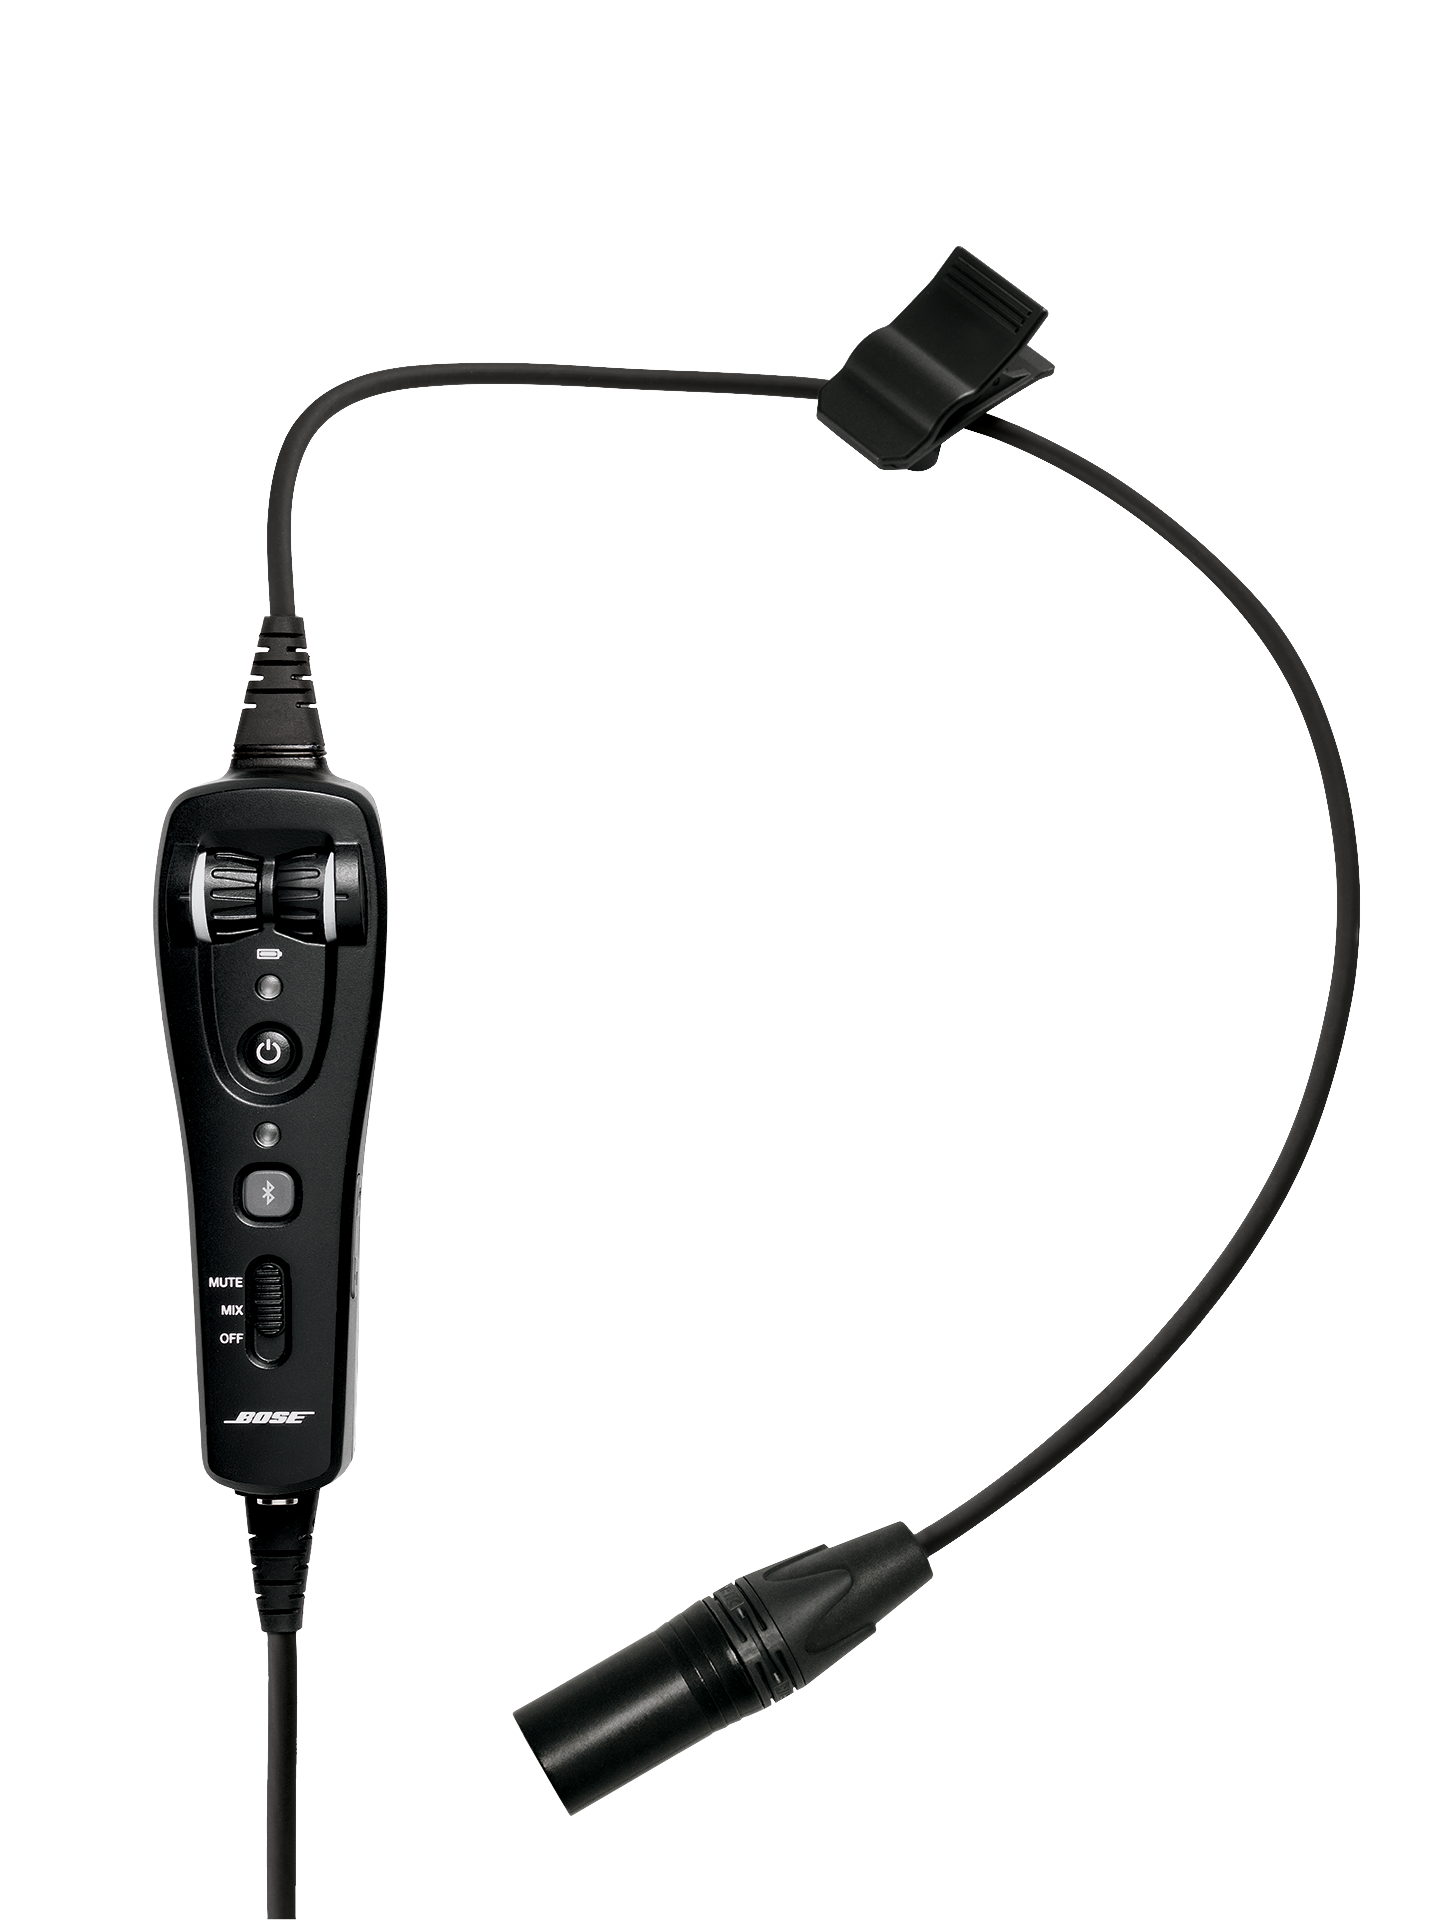 Bose A20 Headset Cable with 5-pin XLR, Plug, Bluetooth, Straight Cable (327070-3070)Image Id:144857